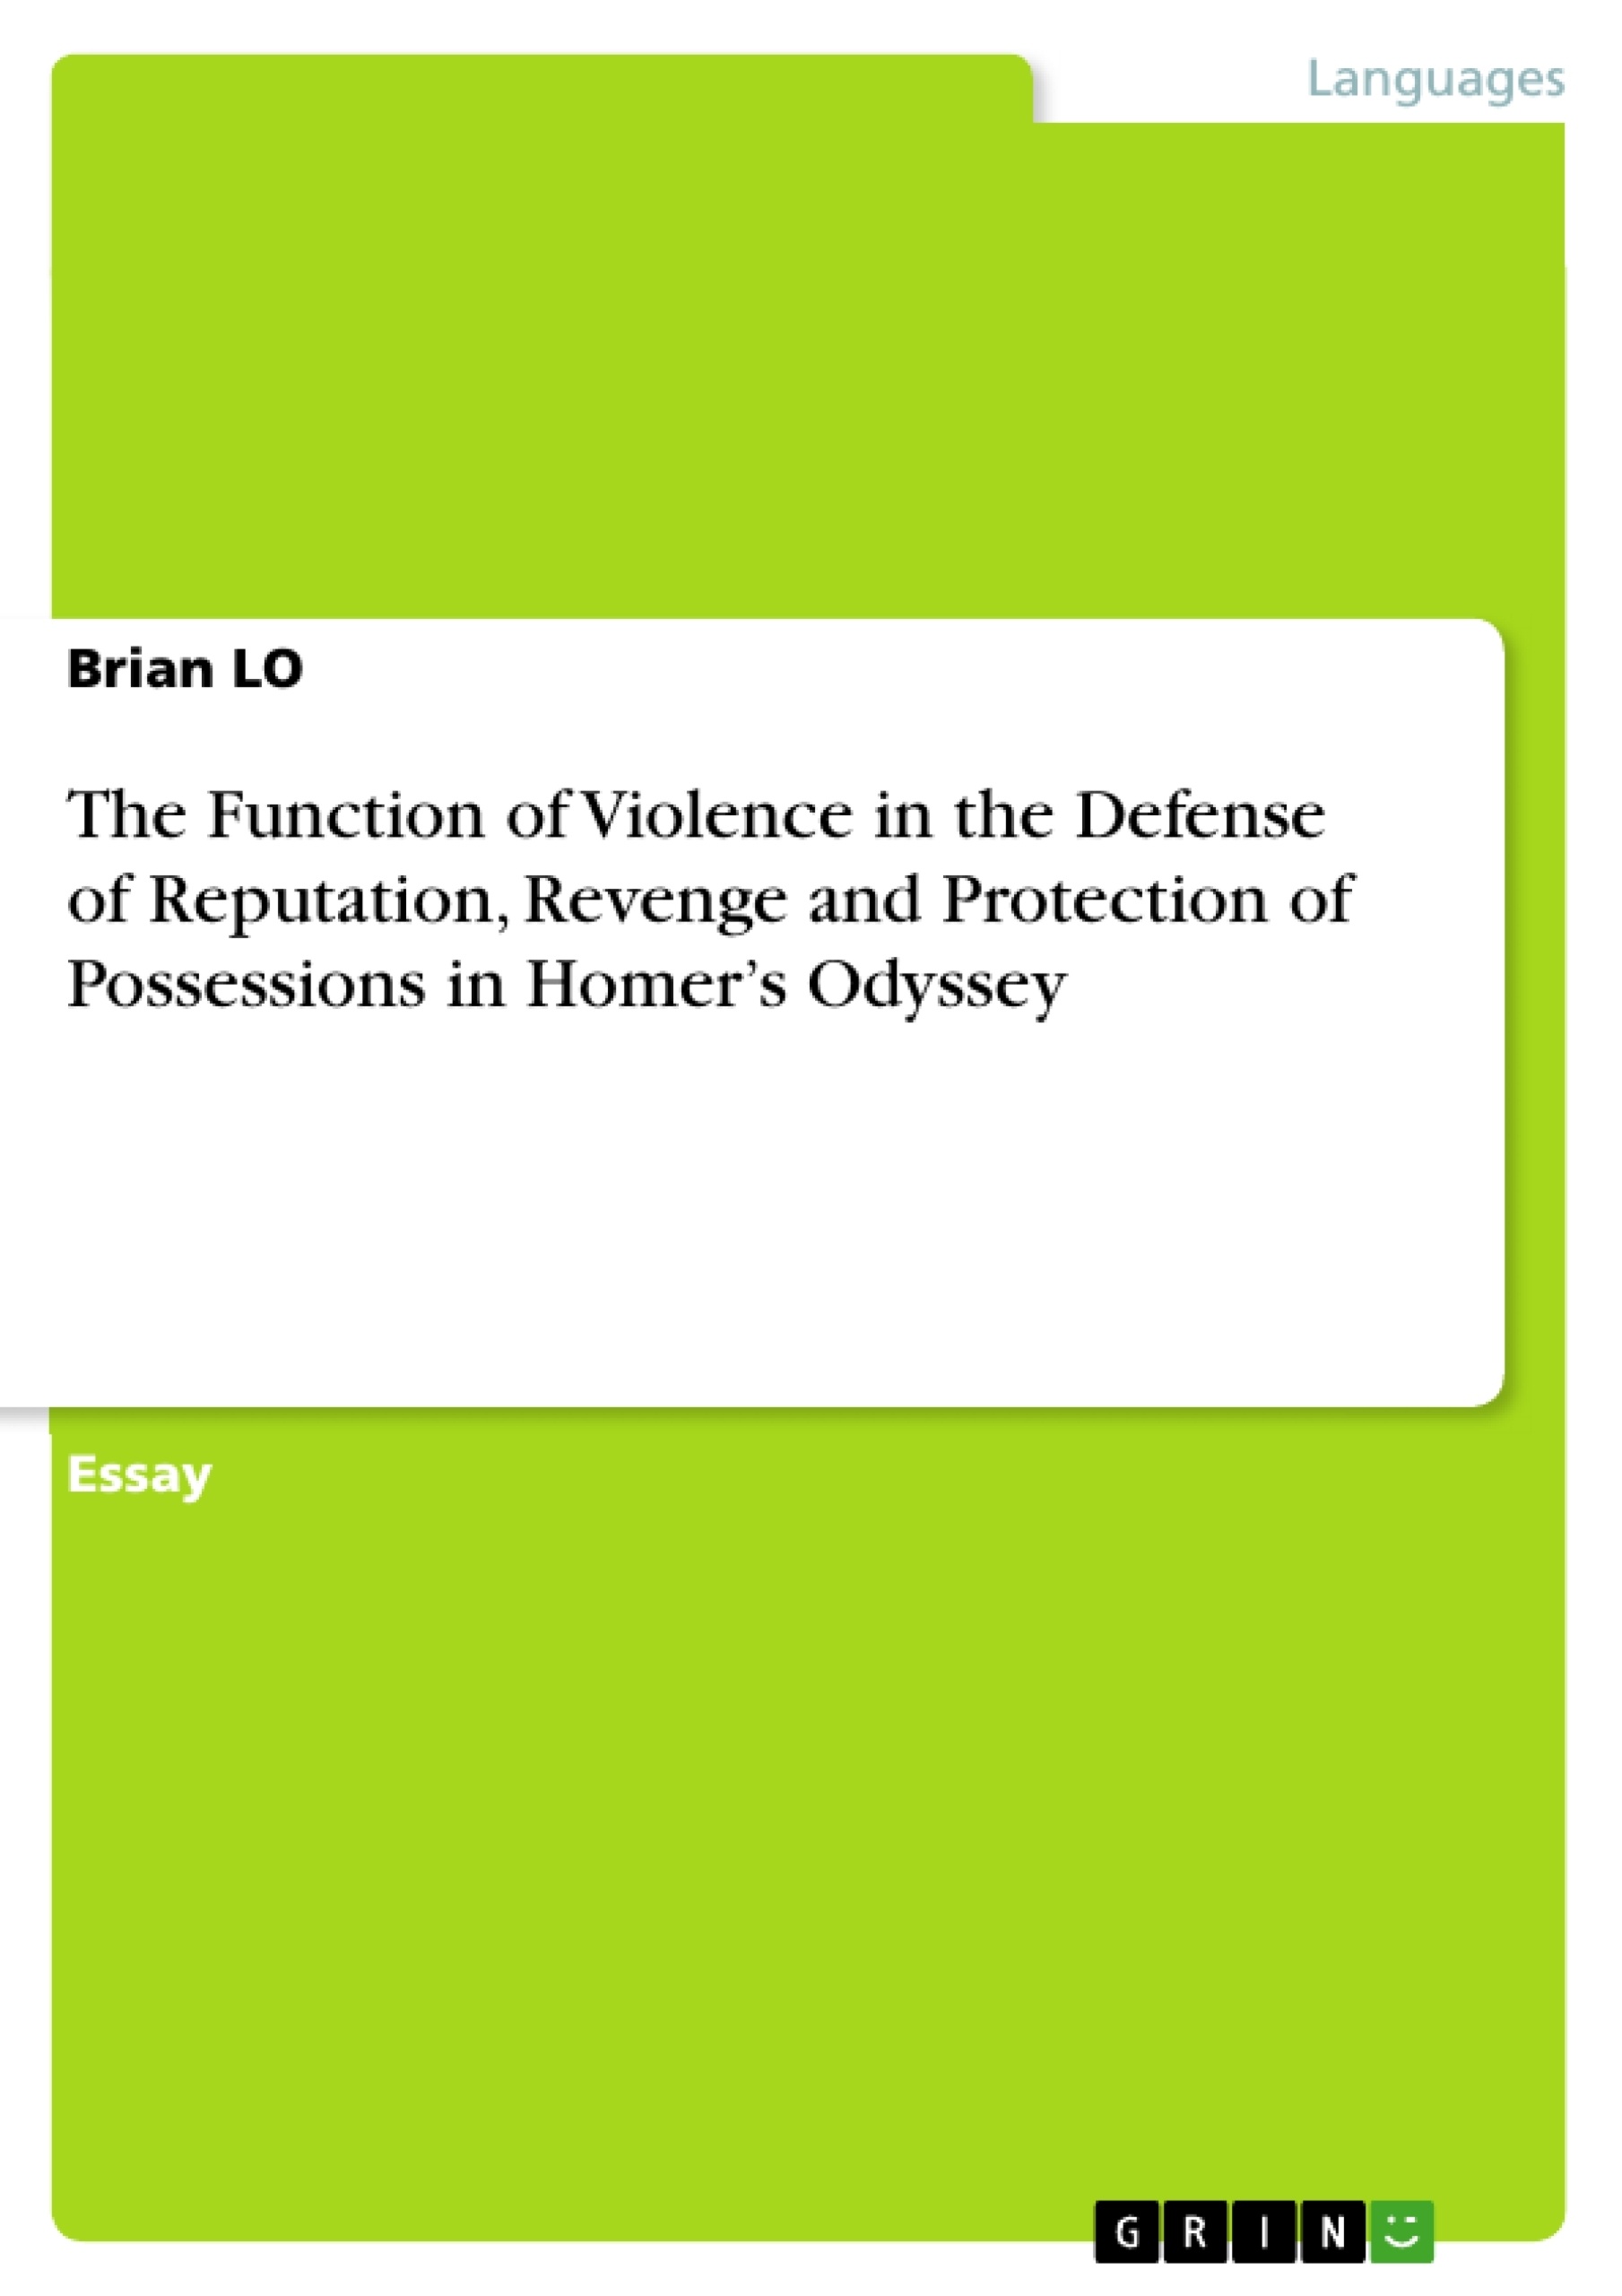 Titel: The Function of Violence in the Defense of Reputation, Revenge and Protection of Possessions in Homer’s Odyssey